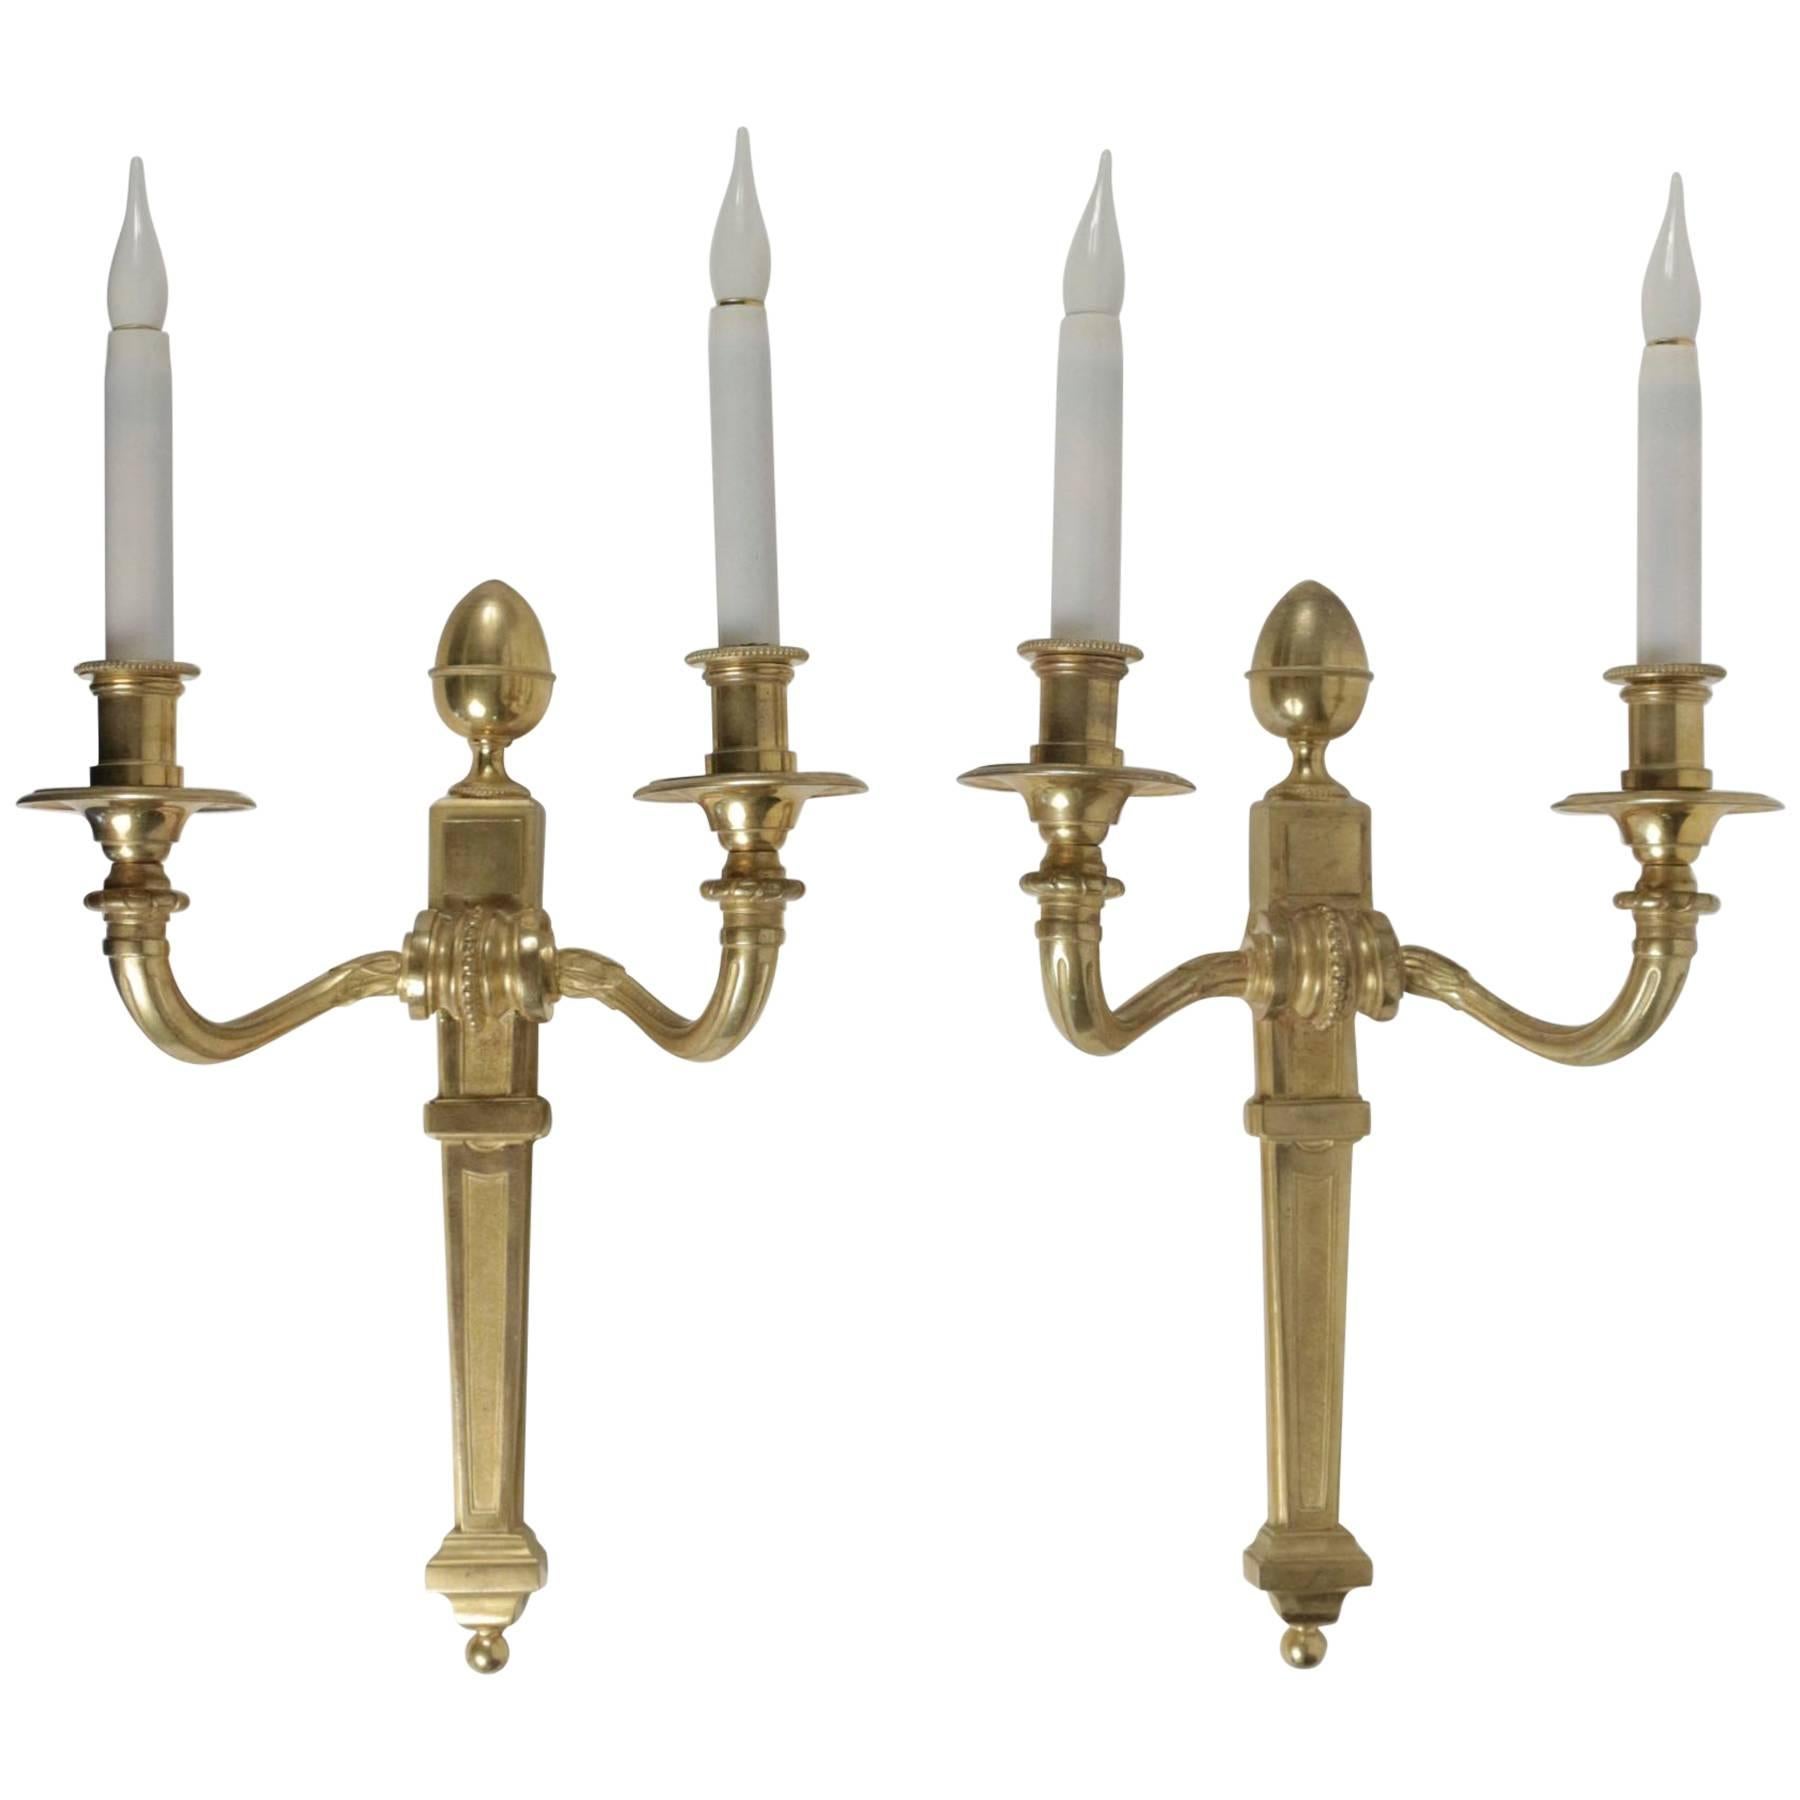 Pair of Bronze Dore Sconces in the Style of Louis XV from the 19th Century